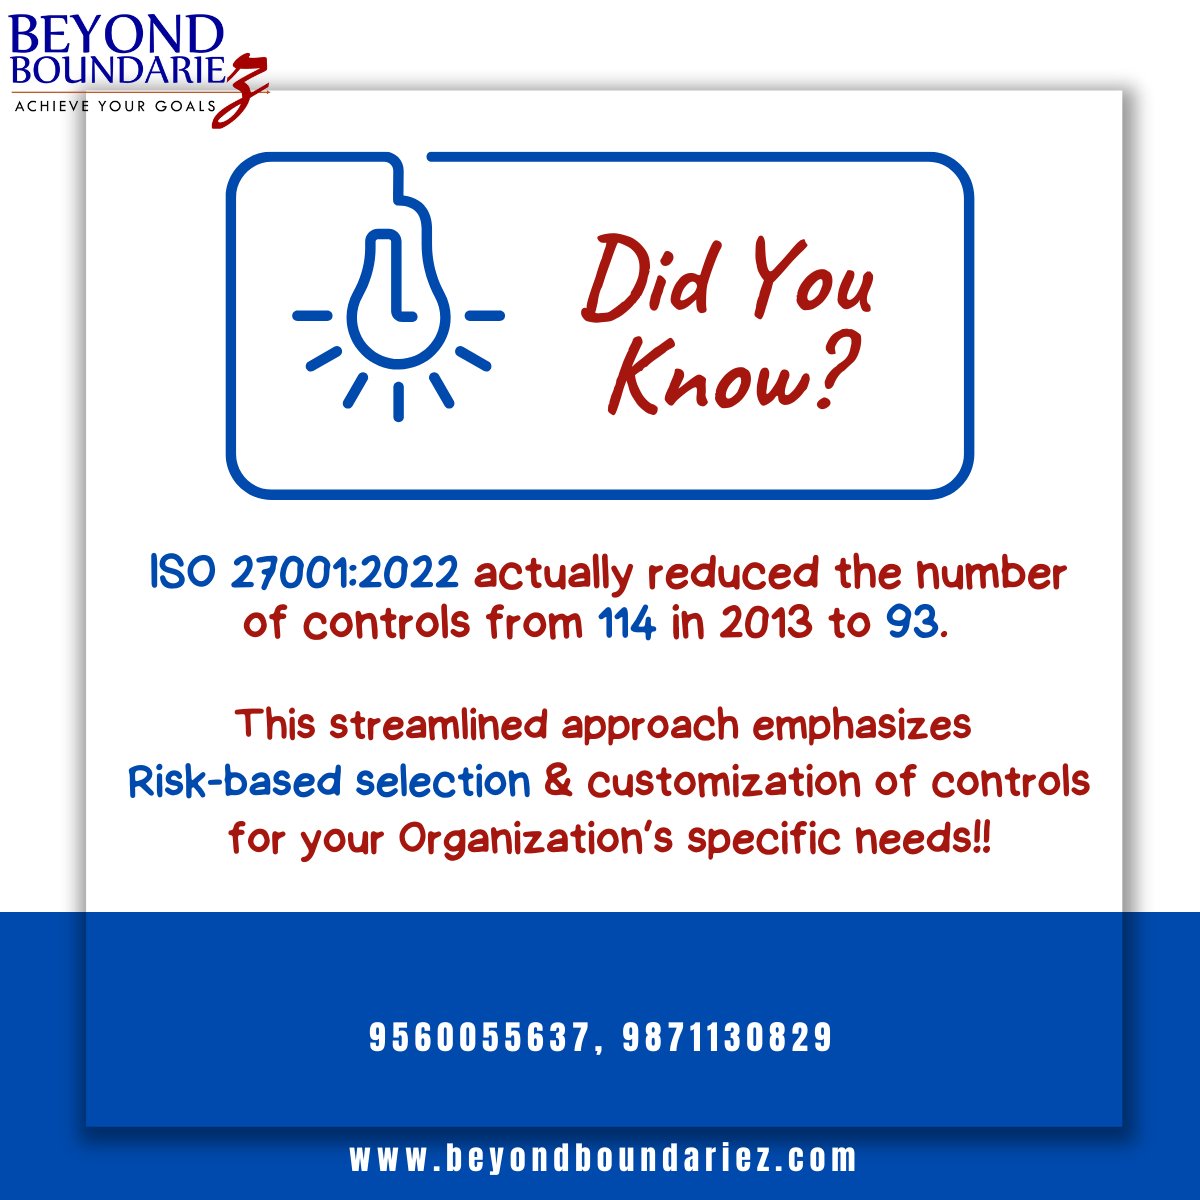 #SaturdayVibes #SaturdayMotivation #QUESTION 
Did you know? ISO 27001:2022 streamlined controls by 21%! Learn how to customize your ISMS for a more efficient & effective approach.
#ISO #cybersecuritytips #cybersecurityawarenessmonth #riskassessment #risk #RiskDefined #iso27001